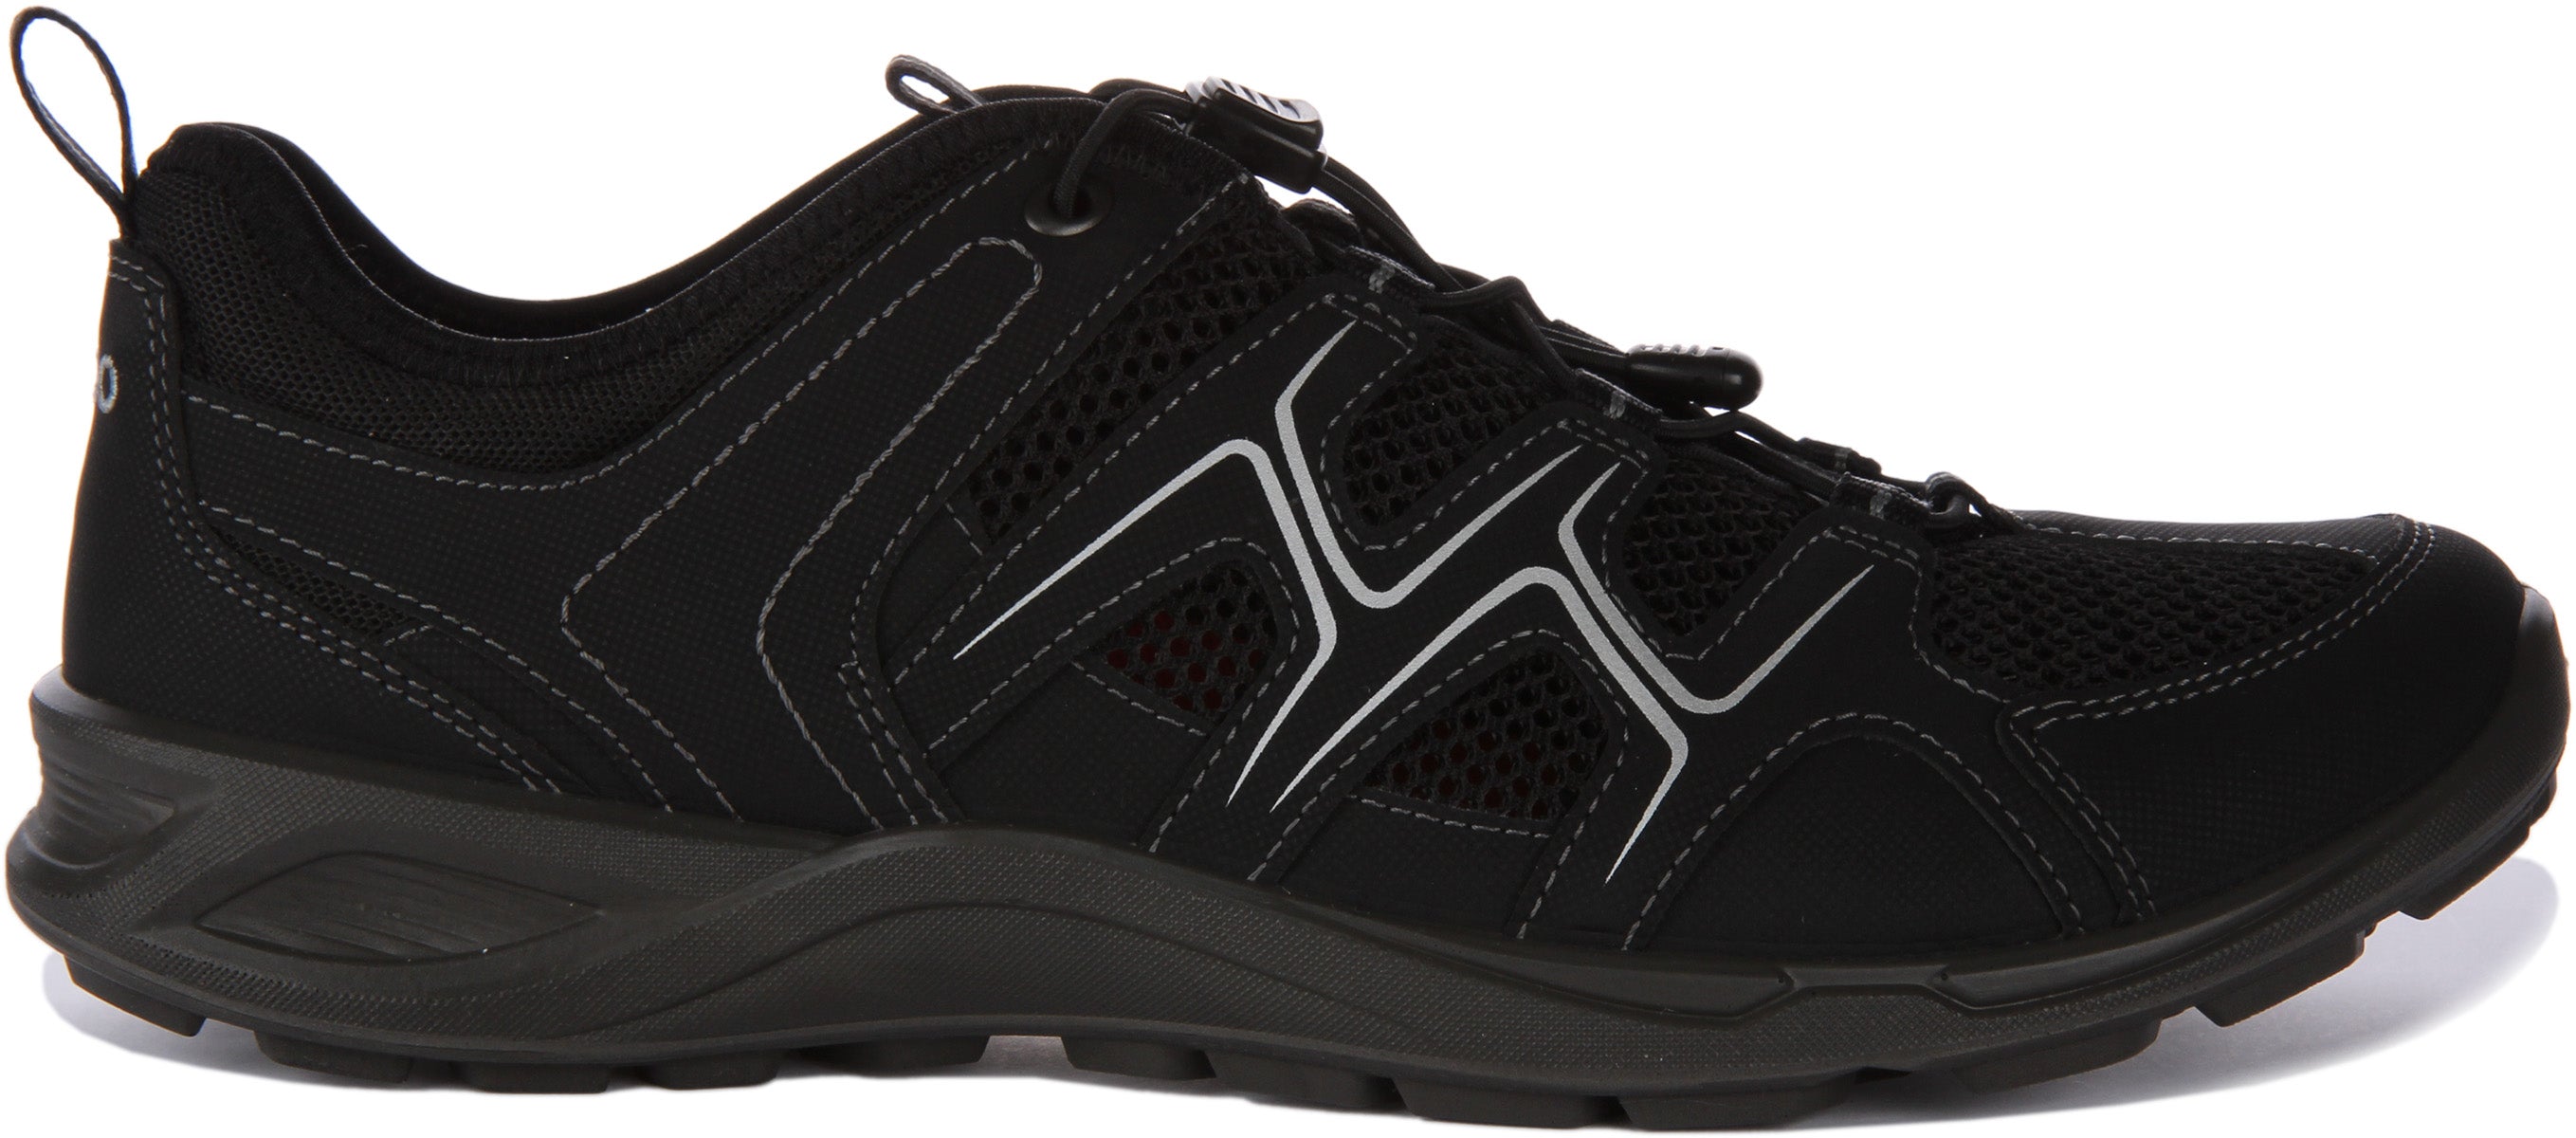 Ecco Terracruise Lite In Black For Men | Outdoor Hiking Shoes – 4feetshoes